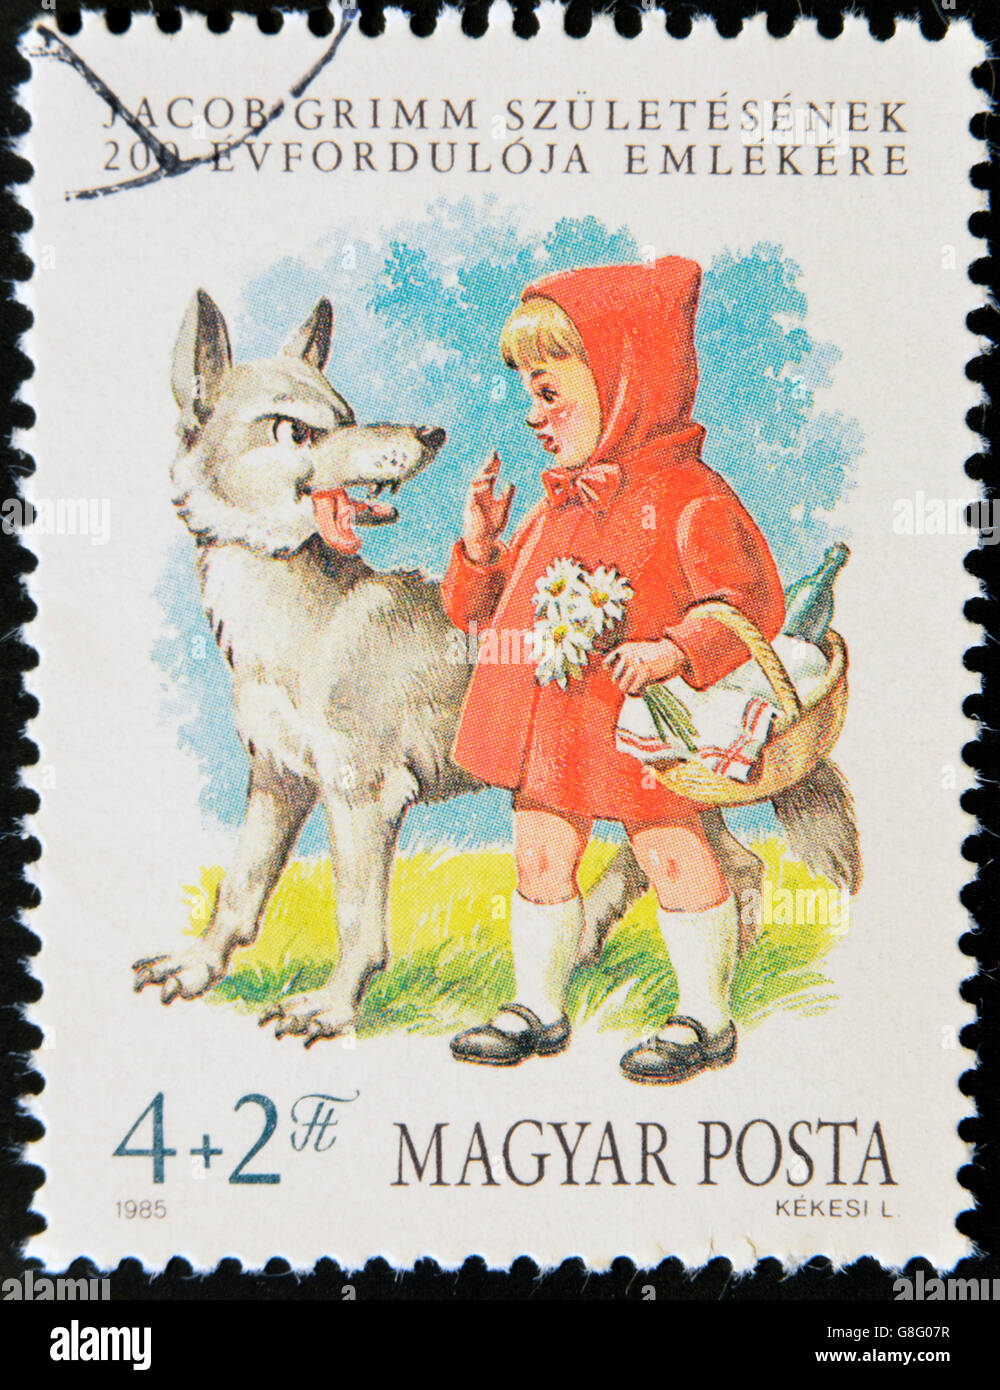 HUNGARY - CIRCA 1985: A stamp printed in Hungary shows Little Red Riding Hood and the Wolf, circa 1985 Stock Photo